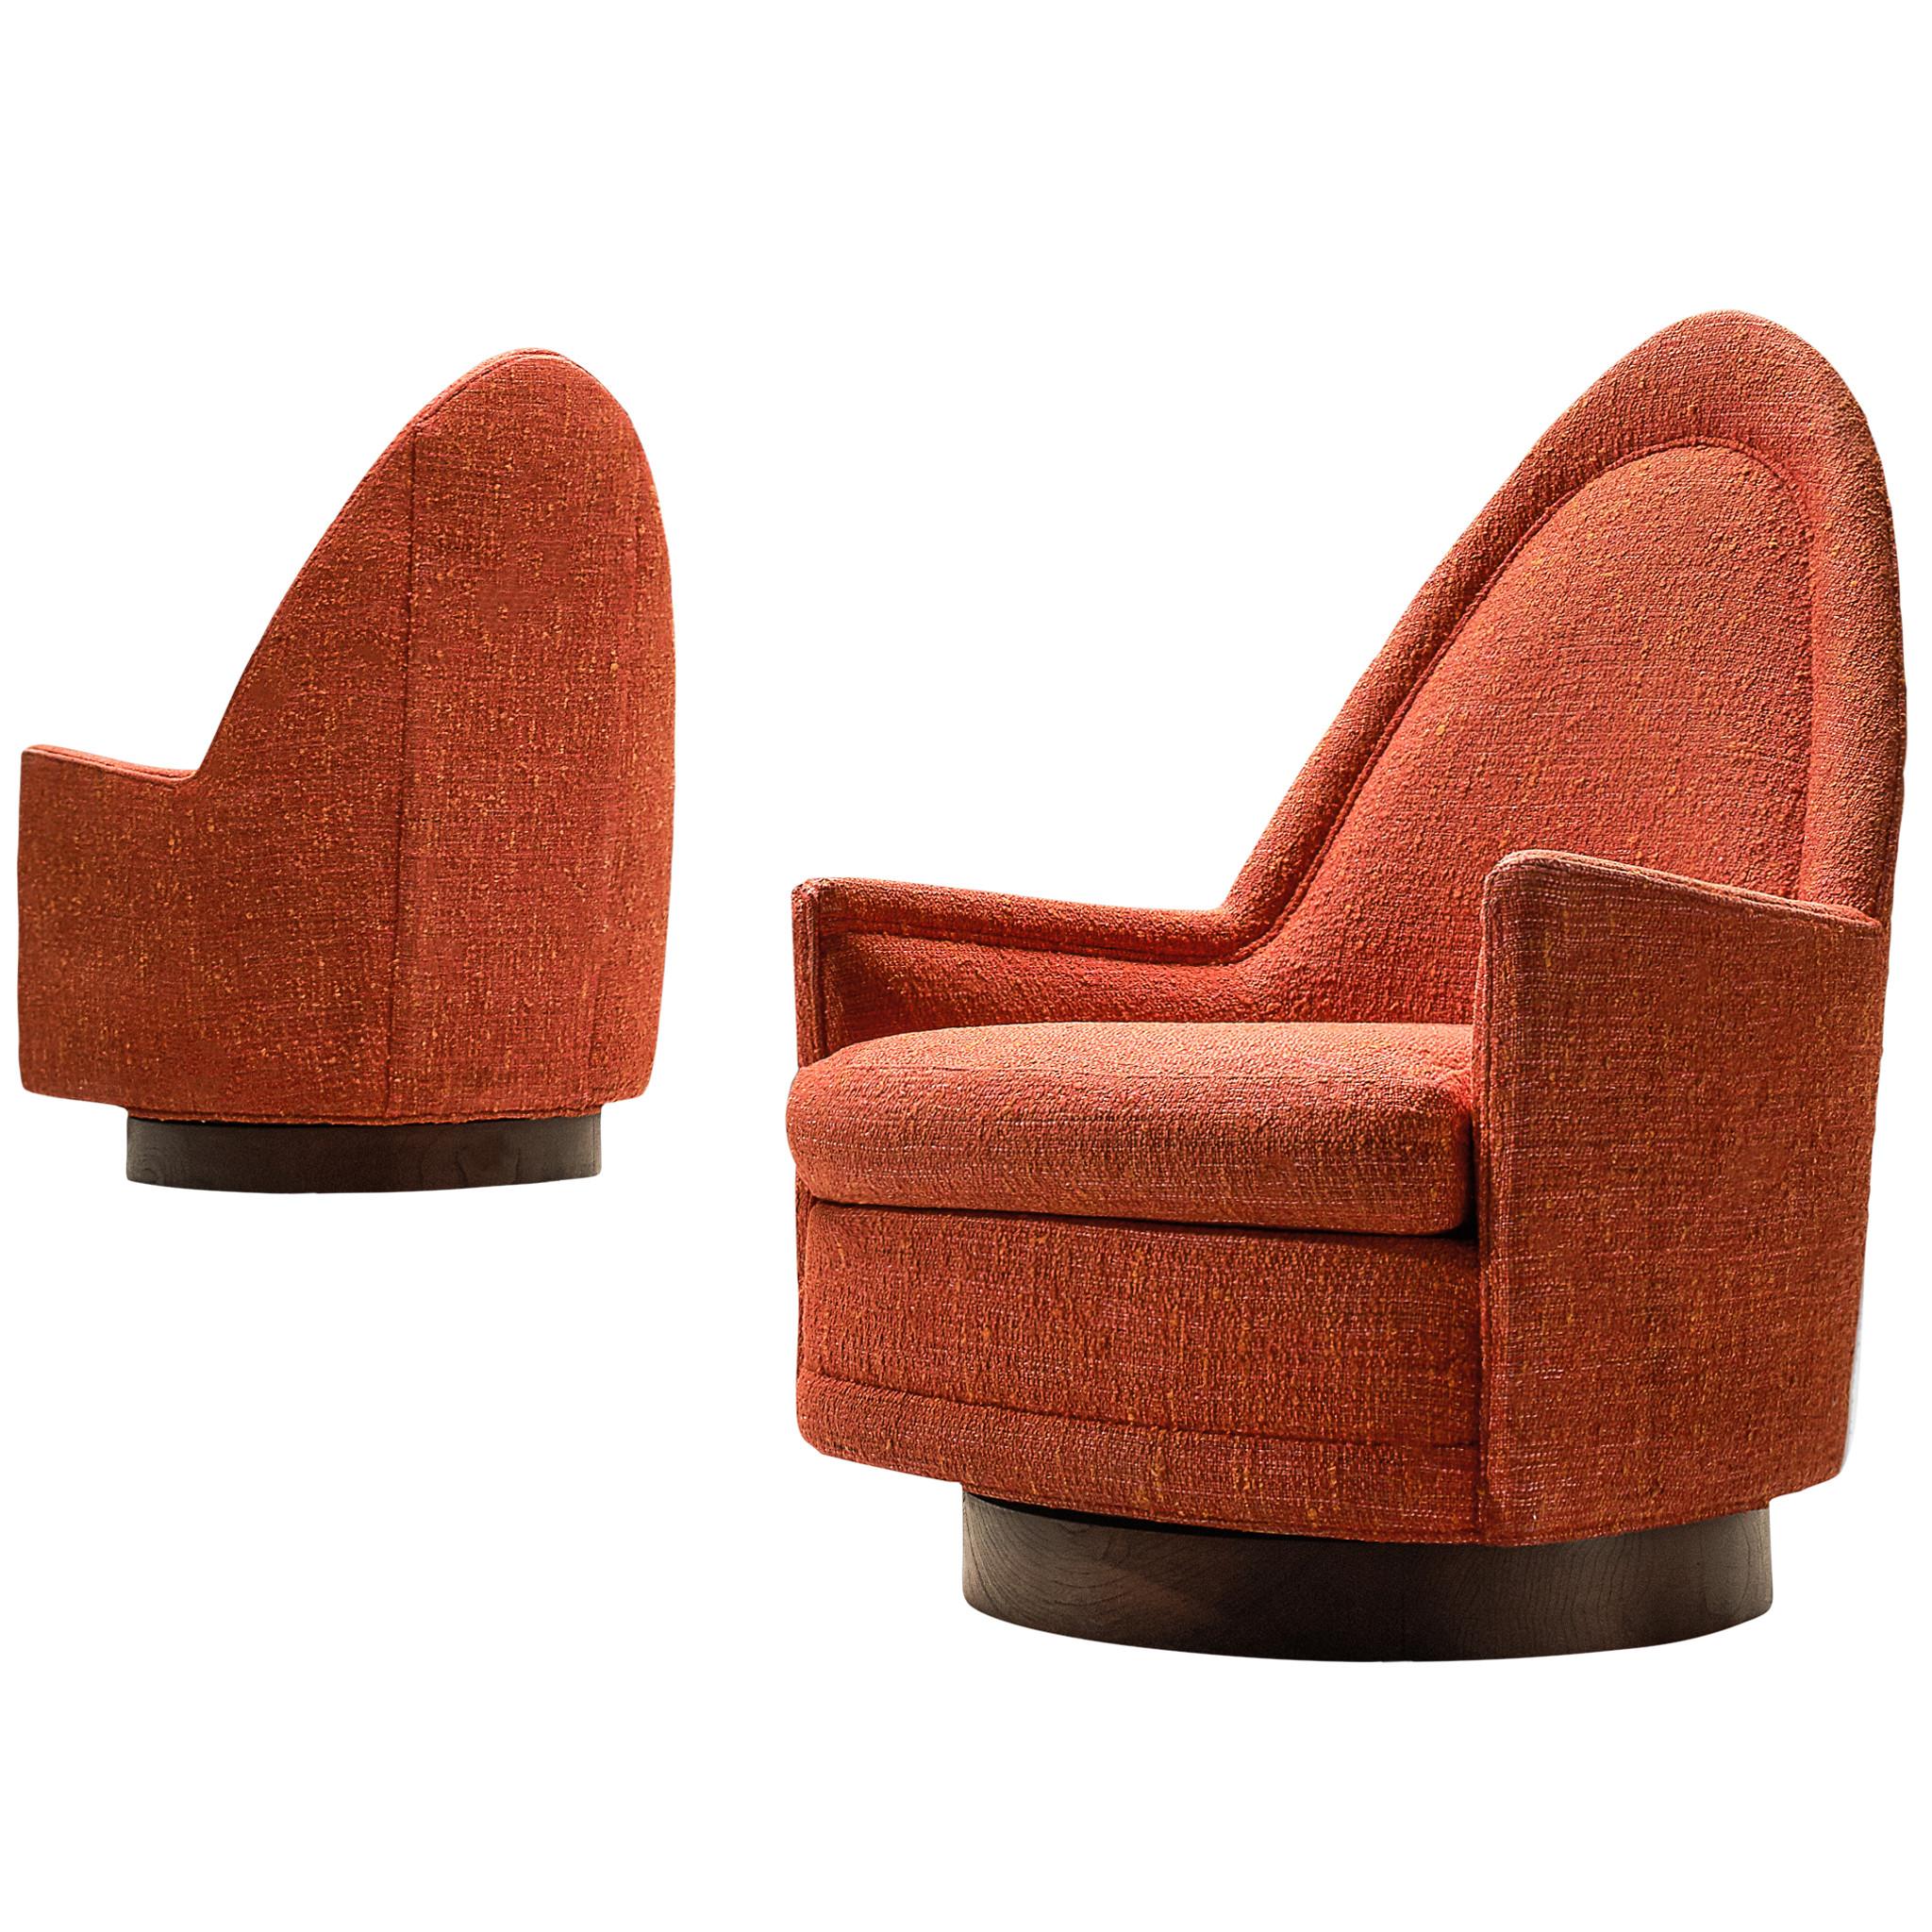 Selig, set of two swivel cathedral chairs, red fabric and wood, United States, 1960s. 

These lounge chairs which embrace the shape of the body, are very comfortable and easy to use, are a set which can be placed in the middle of a living space or